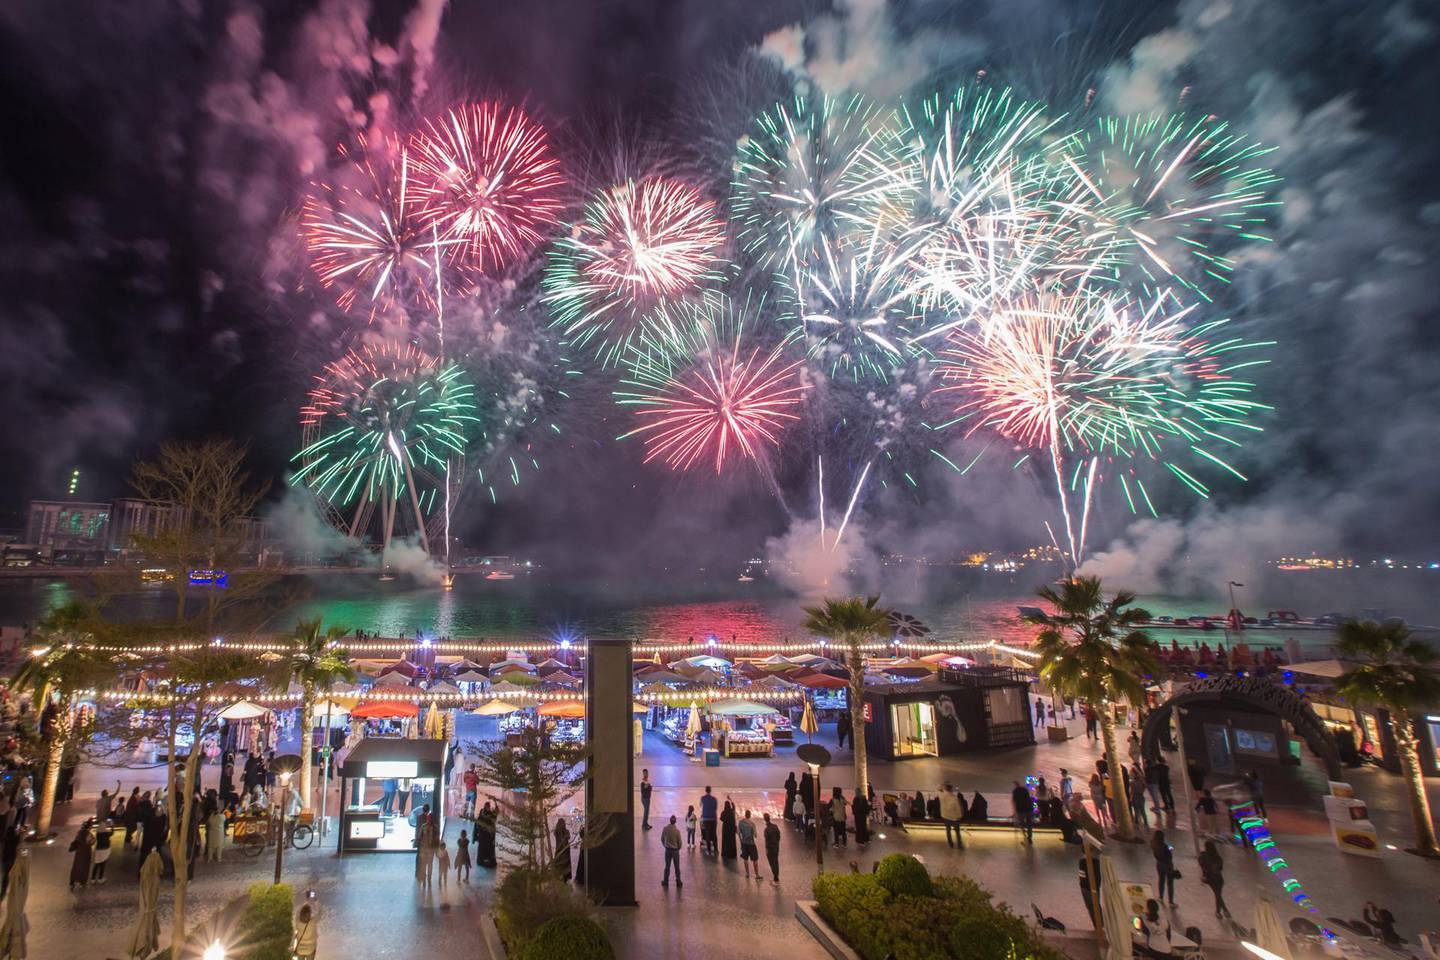 The Beach, JBR will be having fireworks at midnight, in addition to its drone shows, for New Year's Eve. 